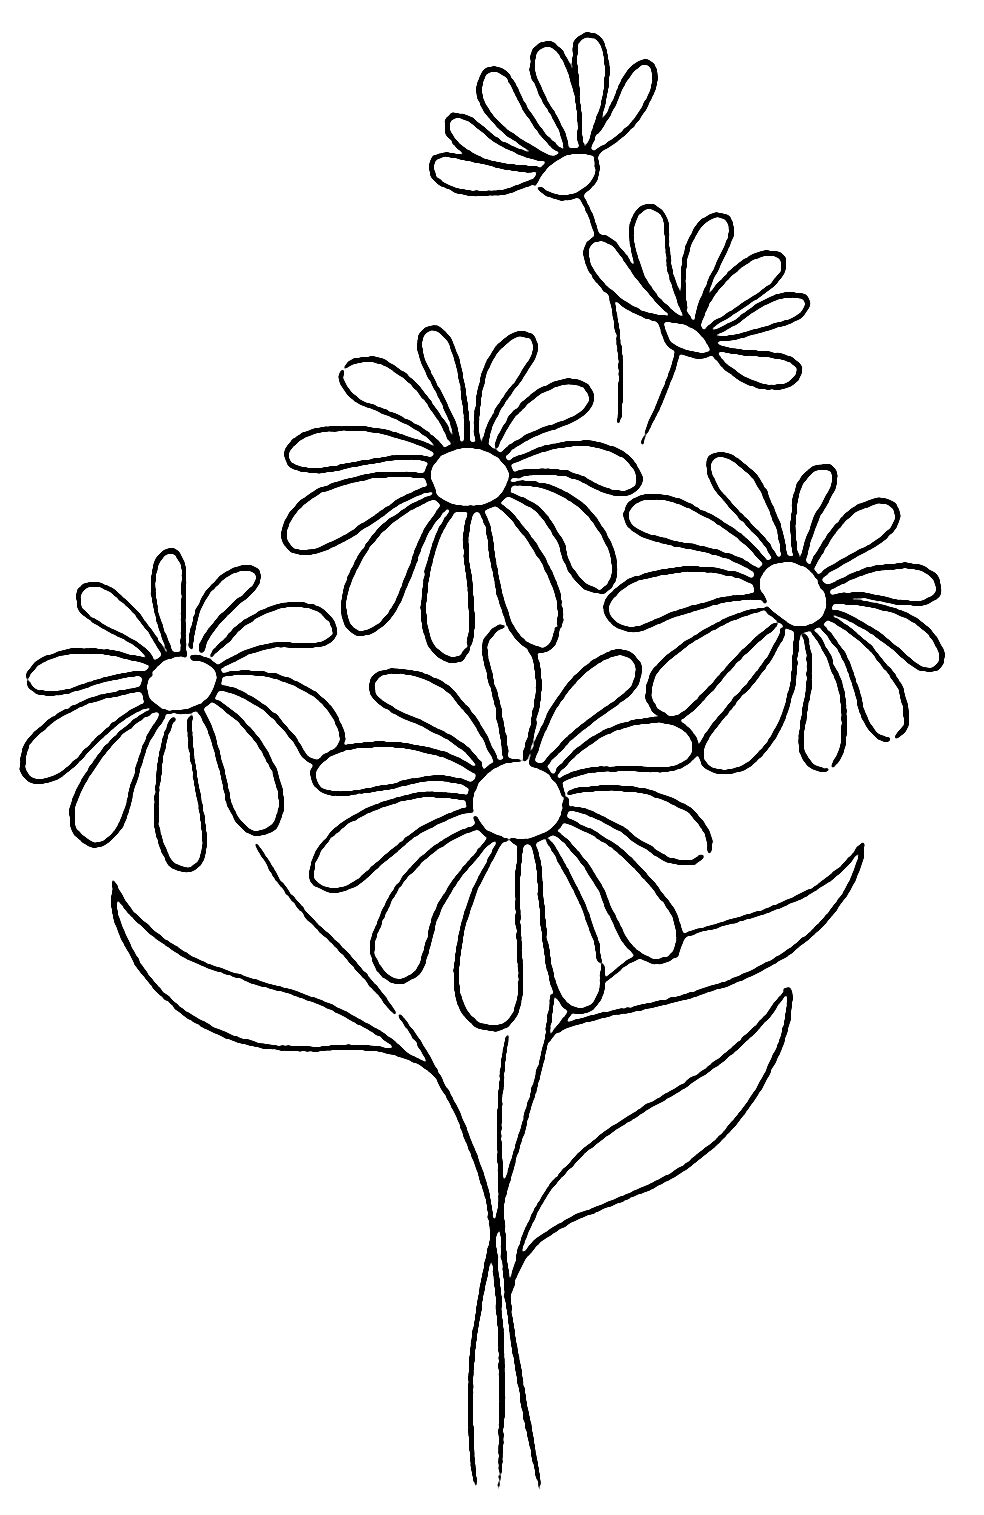 Pretty Daisy Flower Coloring Pages – coloring.rocks!